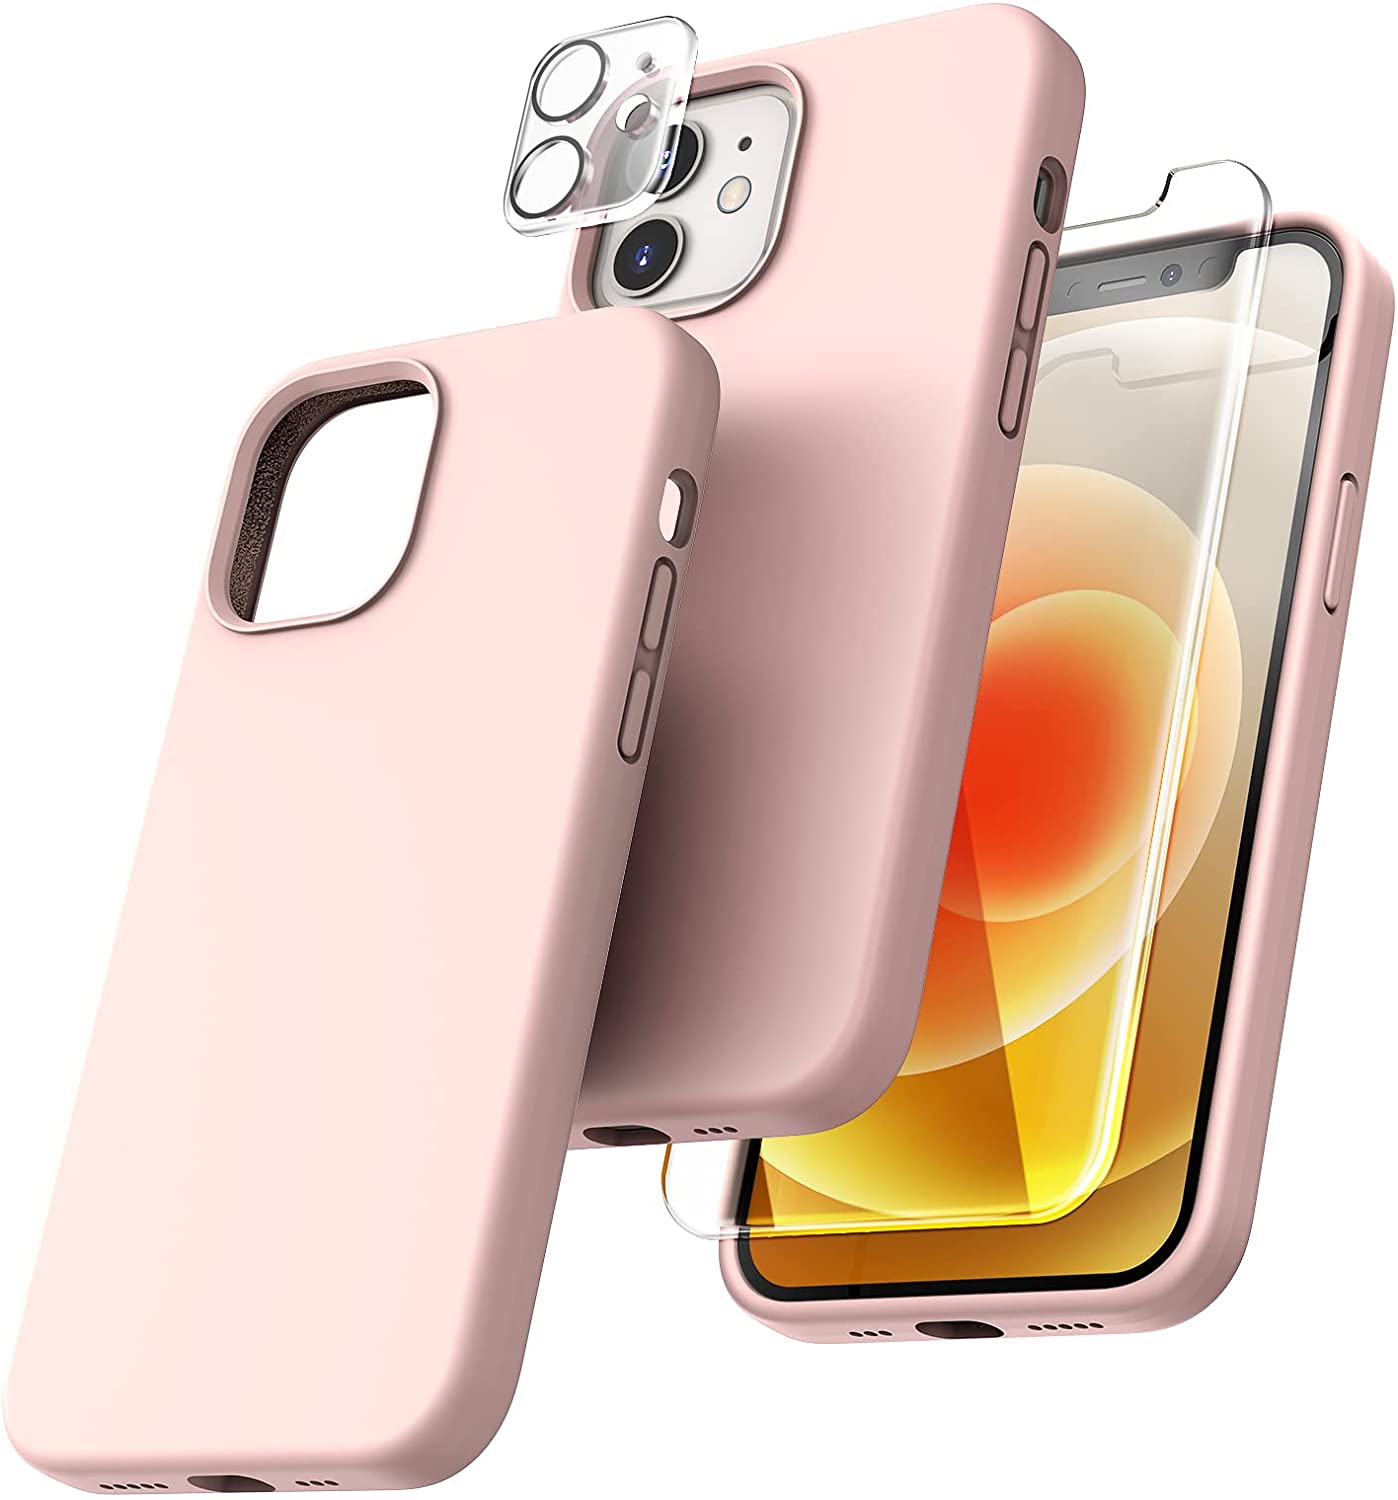 TOCOL [5 in 1] for iPhone 12 Case, for iPhone 12 Pro Case, with 2 Pack Screen Protector + 2 Pack Camera Lens Protector, Silicone Shockproof Phone Case [Anti-Scratch] [Drop Protection], Pink